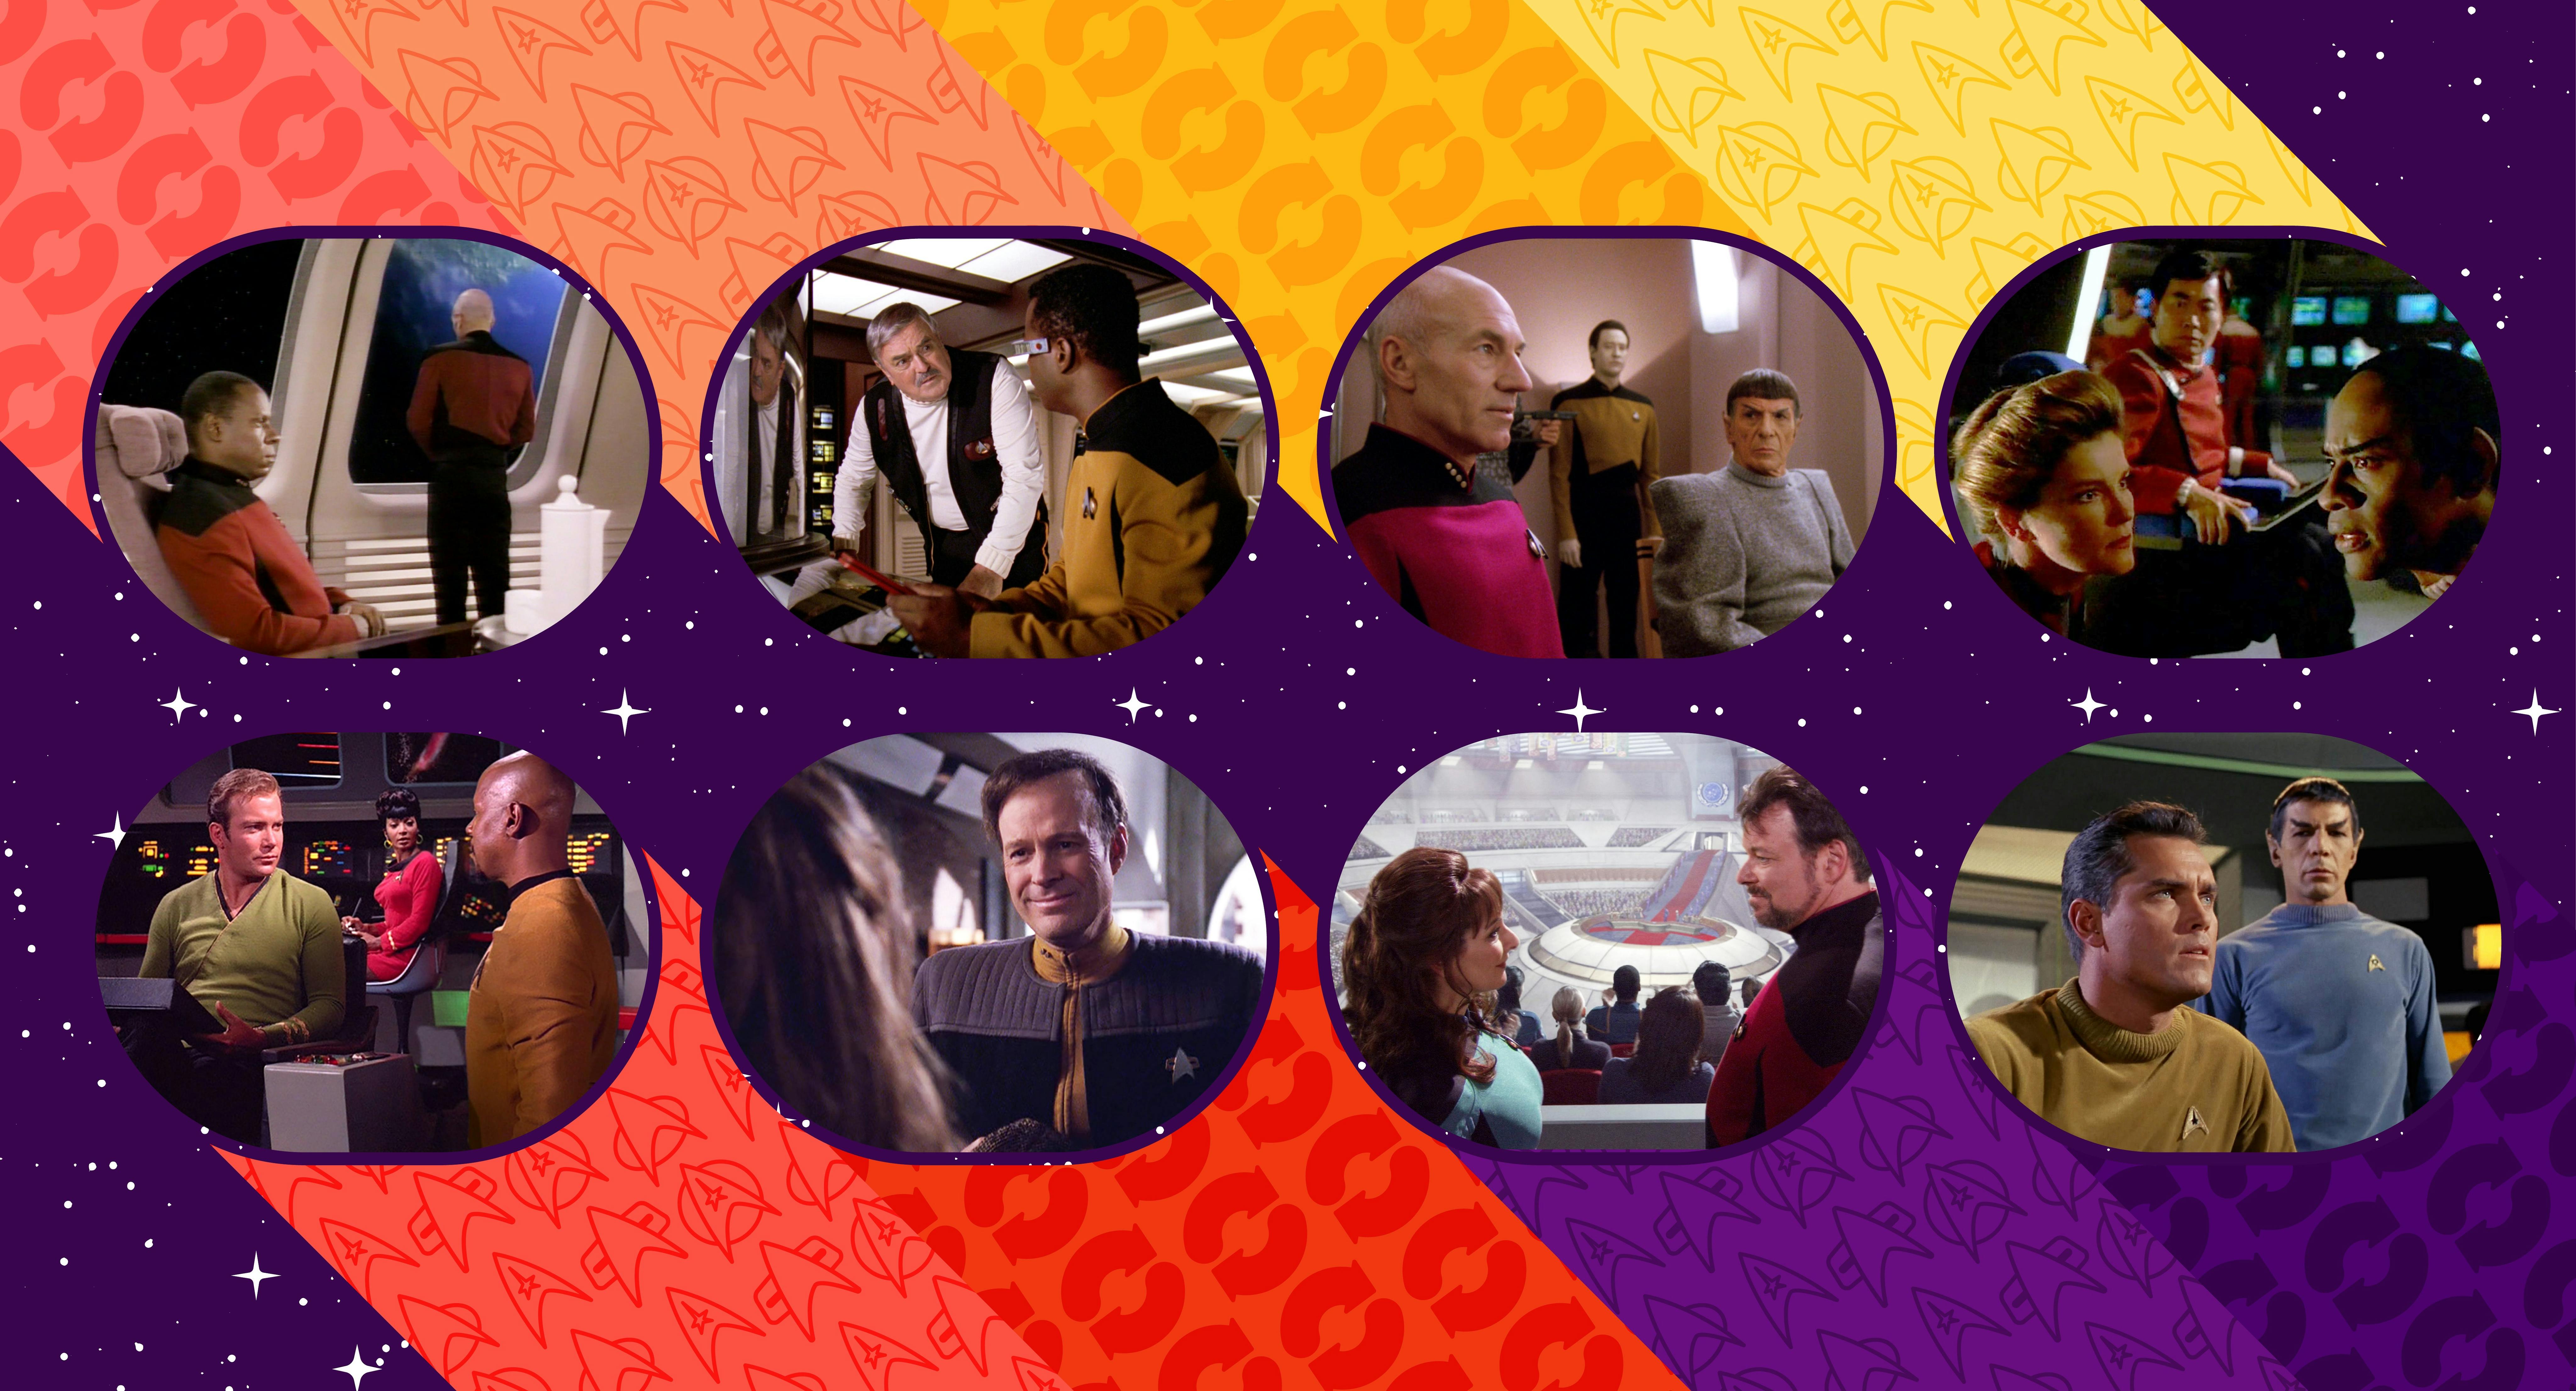 A collage of Star Trek episodes from across the franchise against a red, orange, yellow, and purple background.